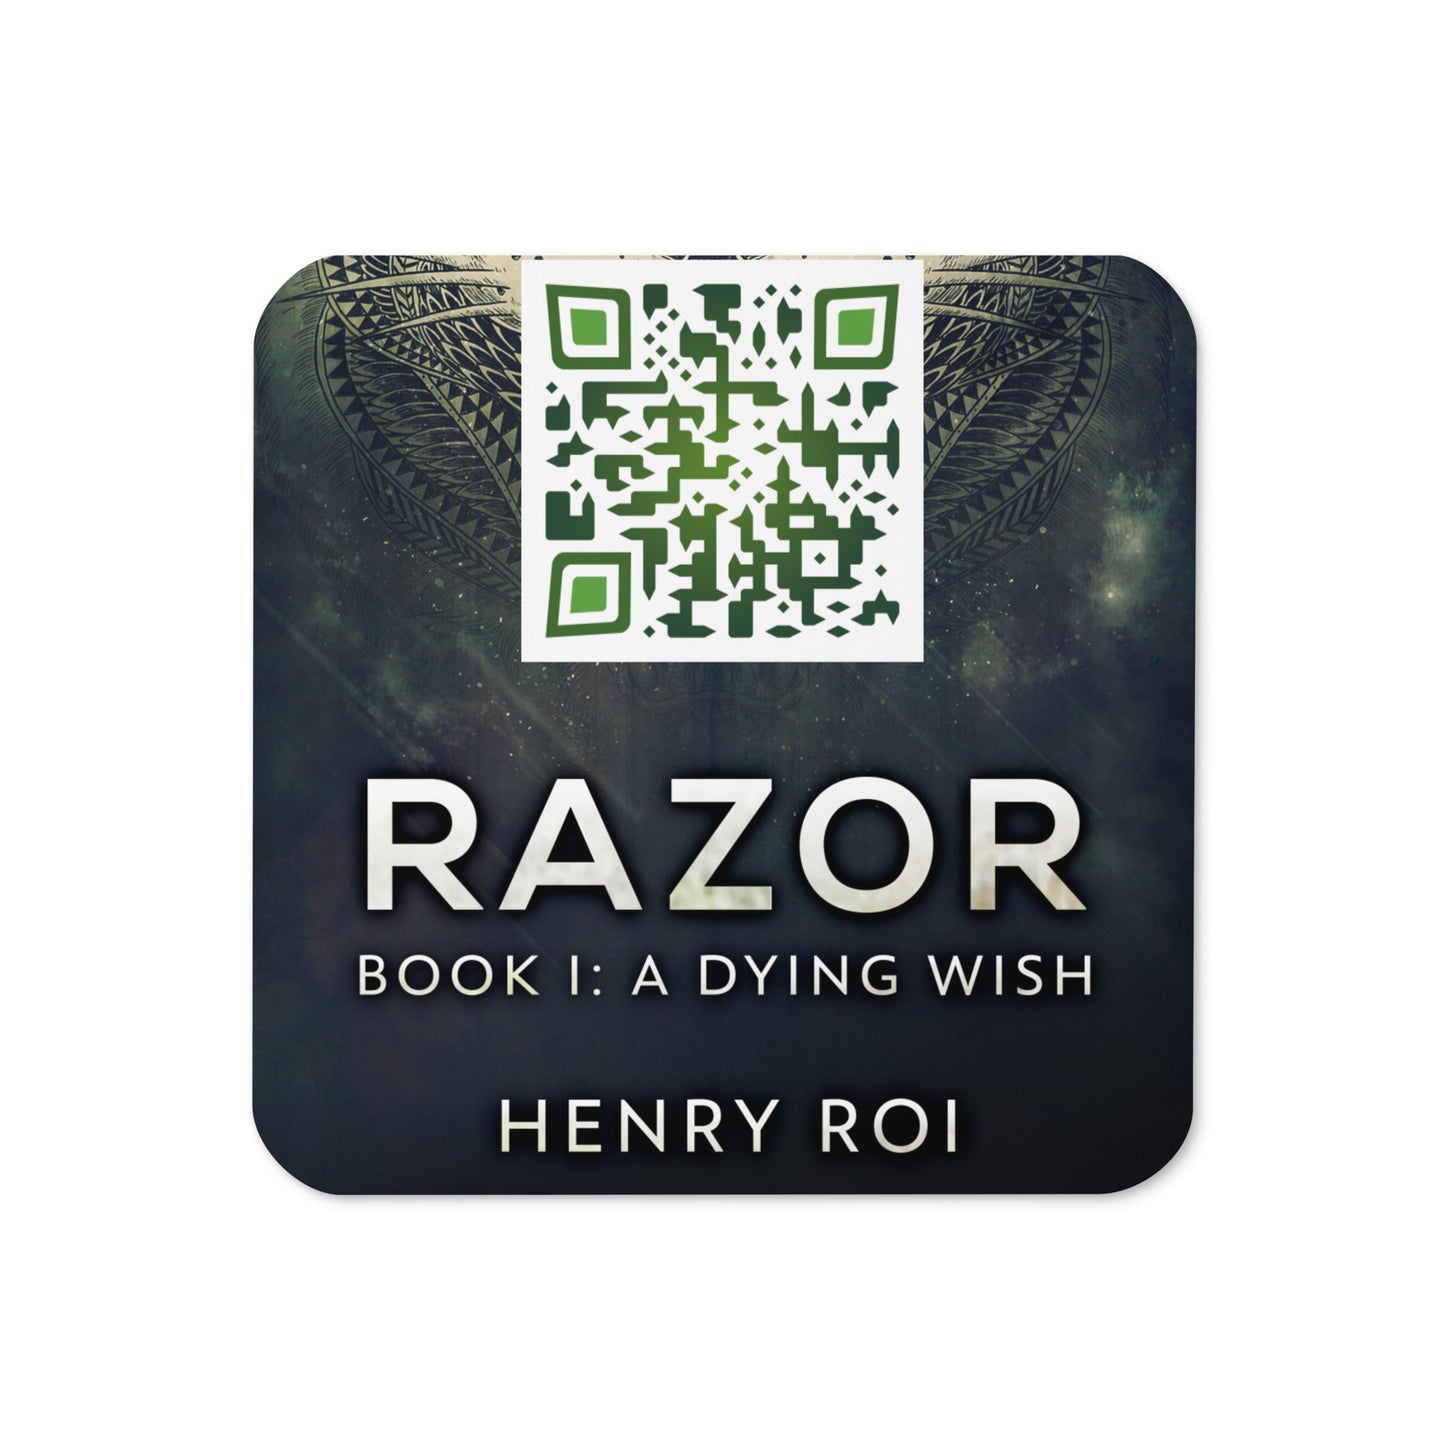 coaster with cover art from Henry Roi's book A Dying Wish